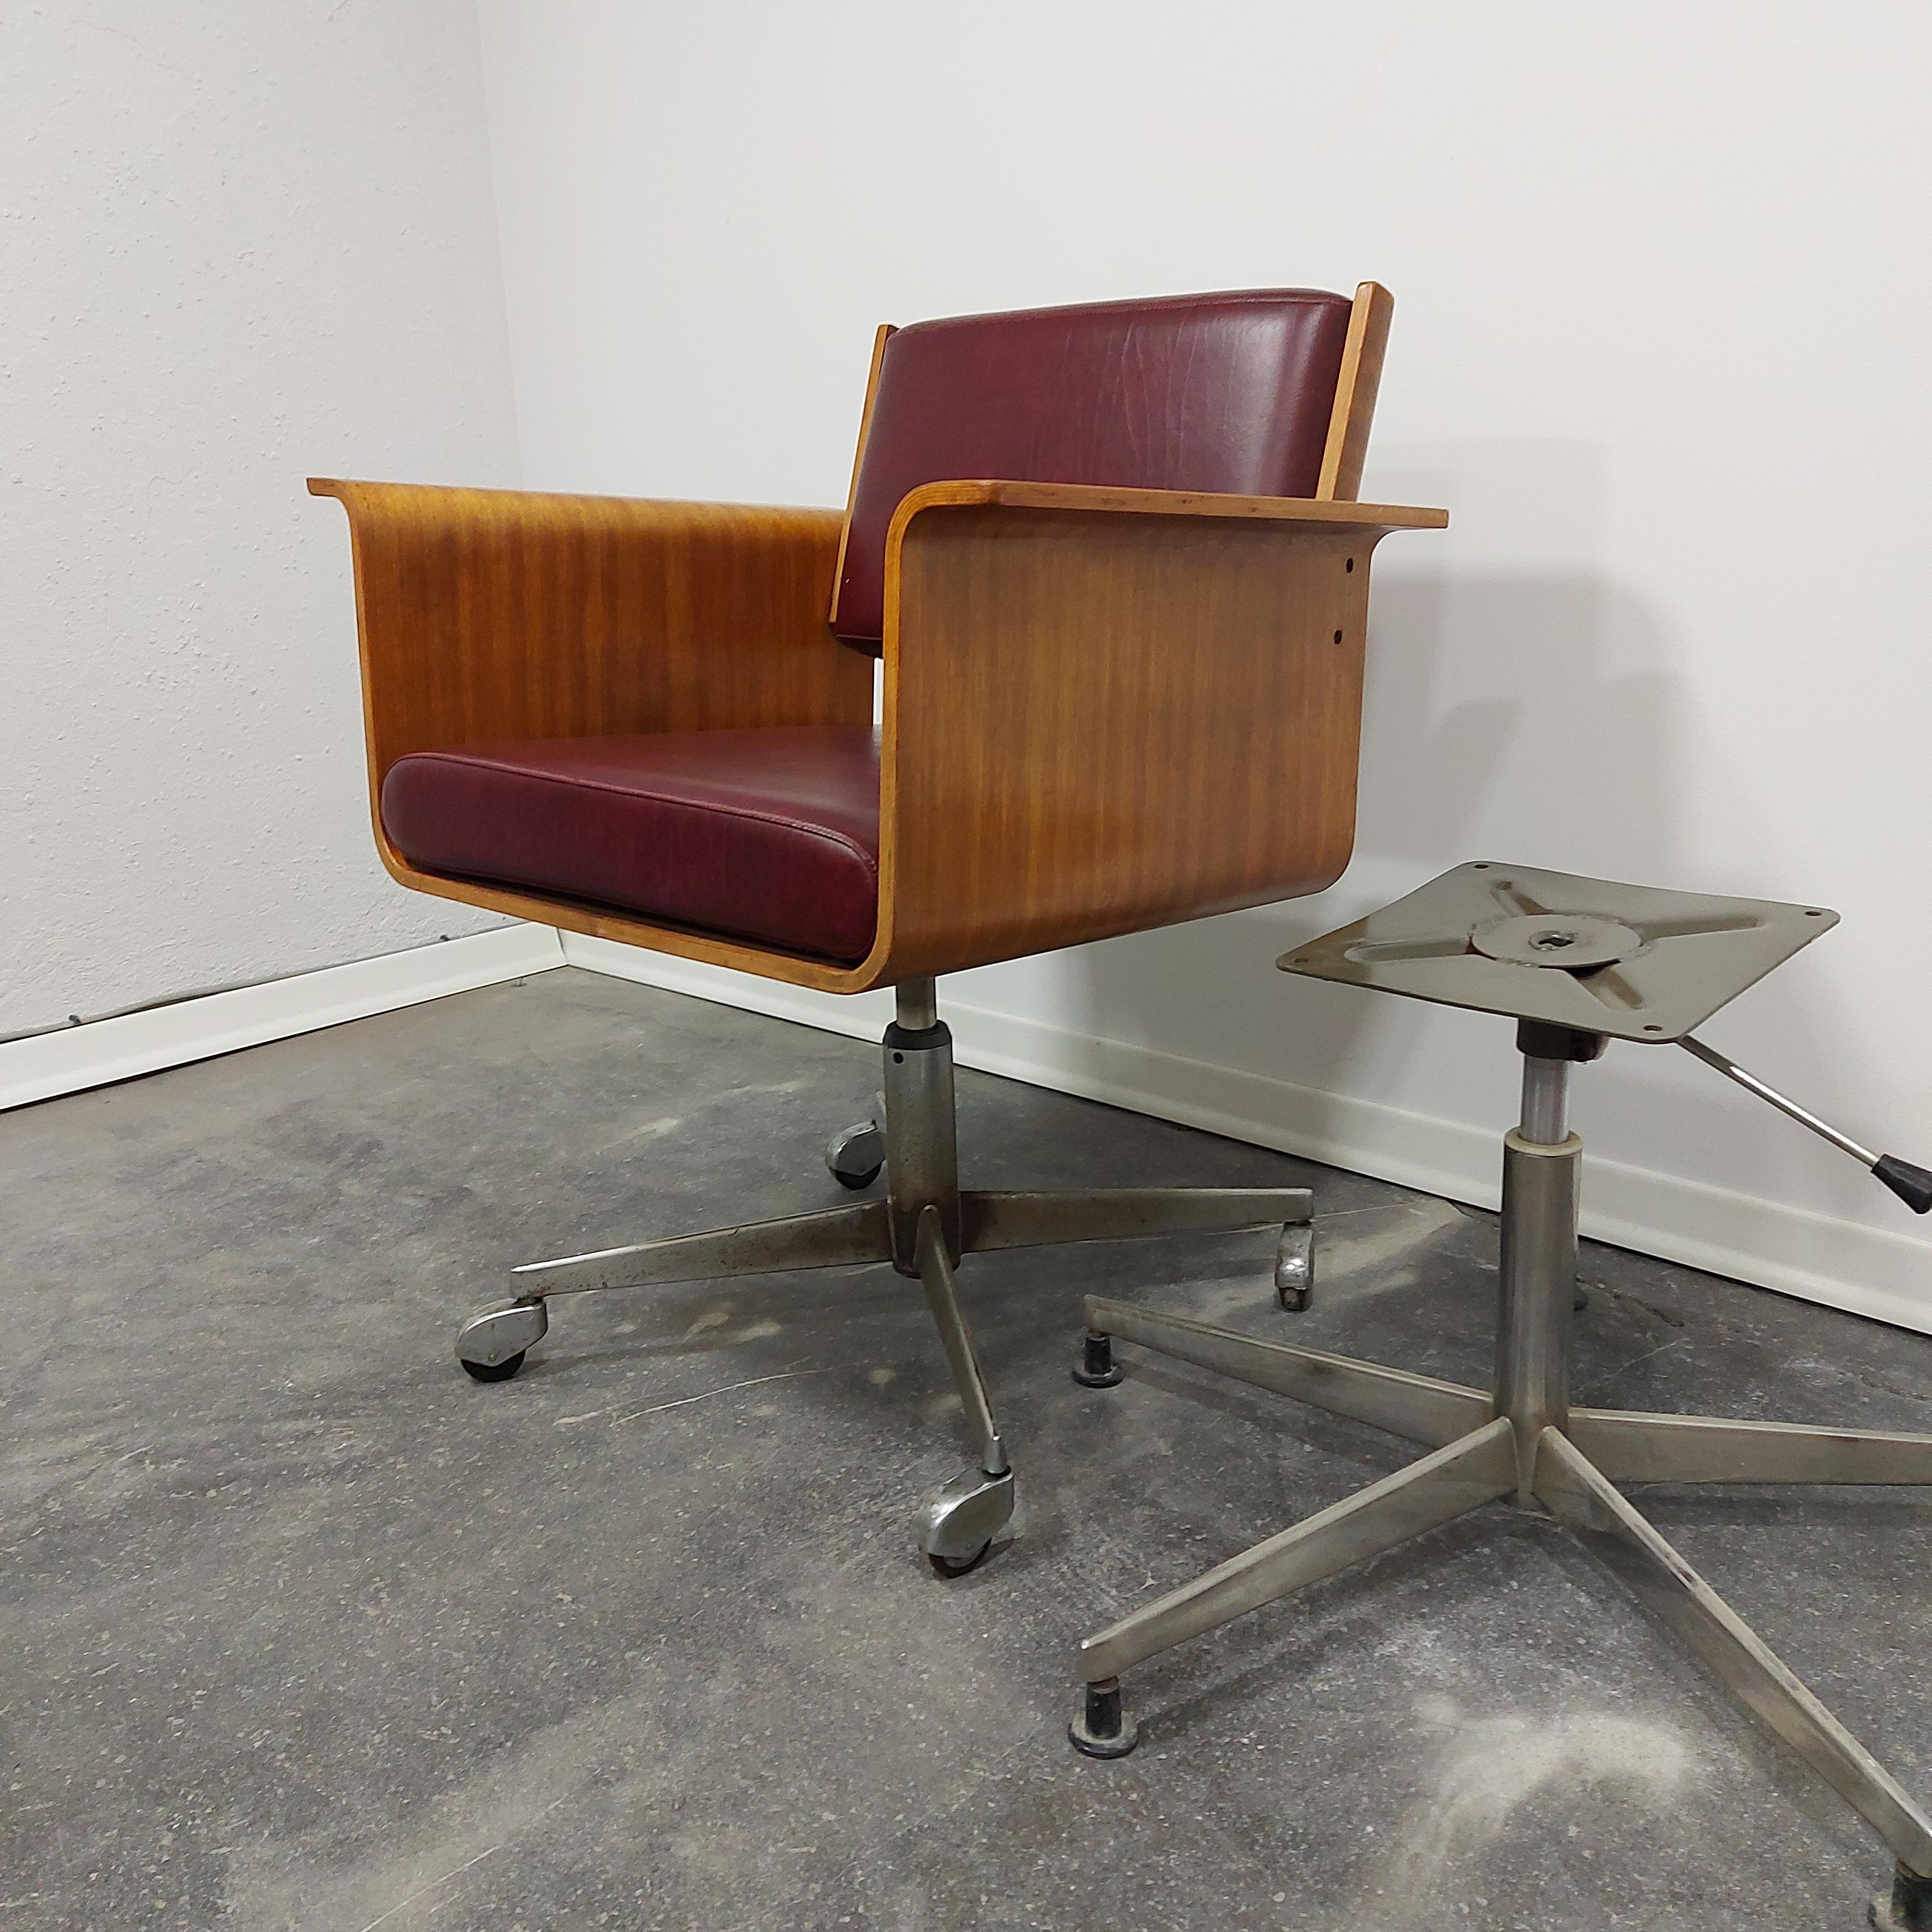 Vintage armrest lounge chair produced by STOL Kamnik (rare chair).

Period: 1970s 

Material: plywood, metal chromed base, leather.

Condition: very good vintage condition, some signs of use.

The hight can be adjusted but it does not work - on